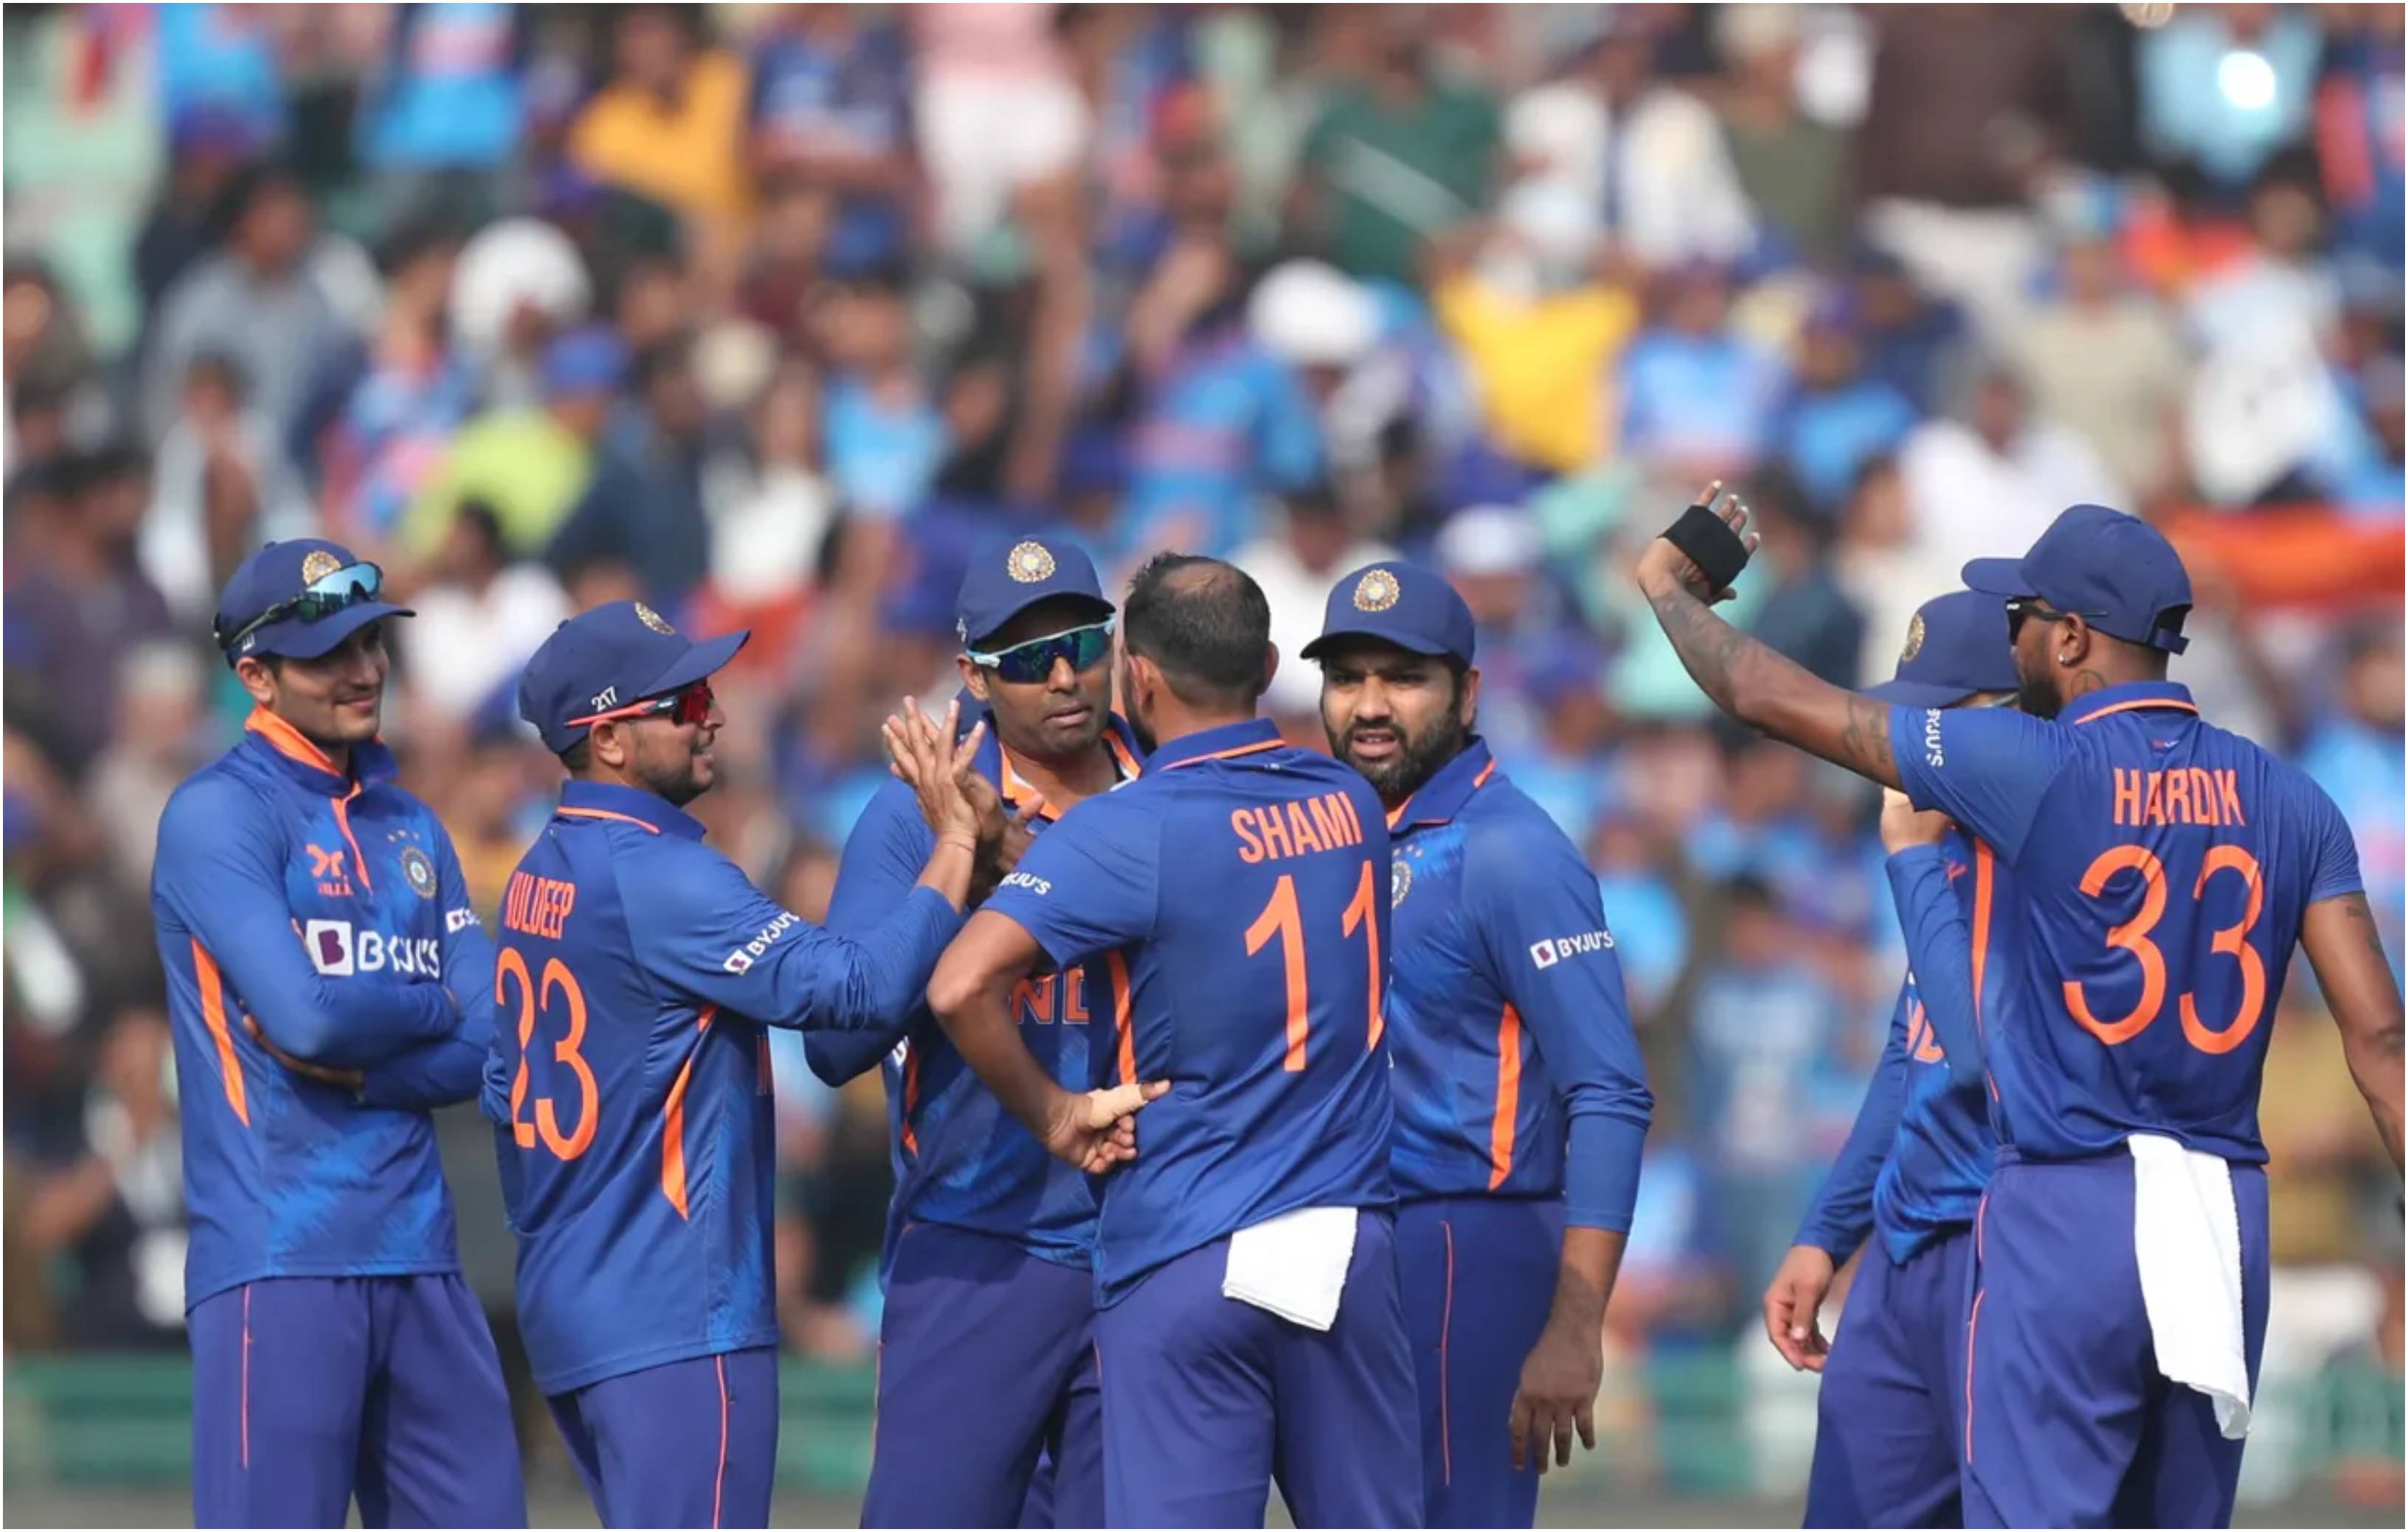 India outplayed New Zealand in the second ODI | BCCI